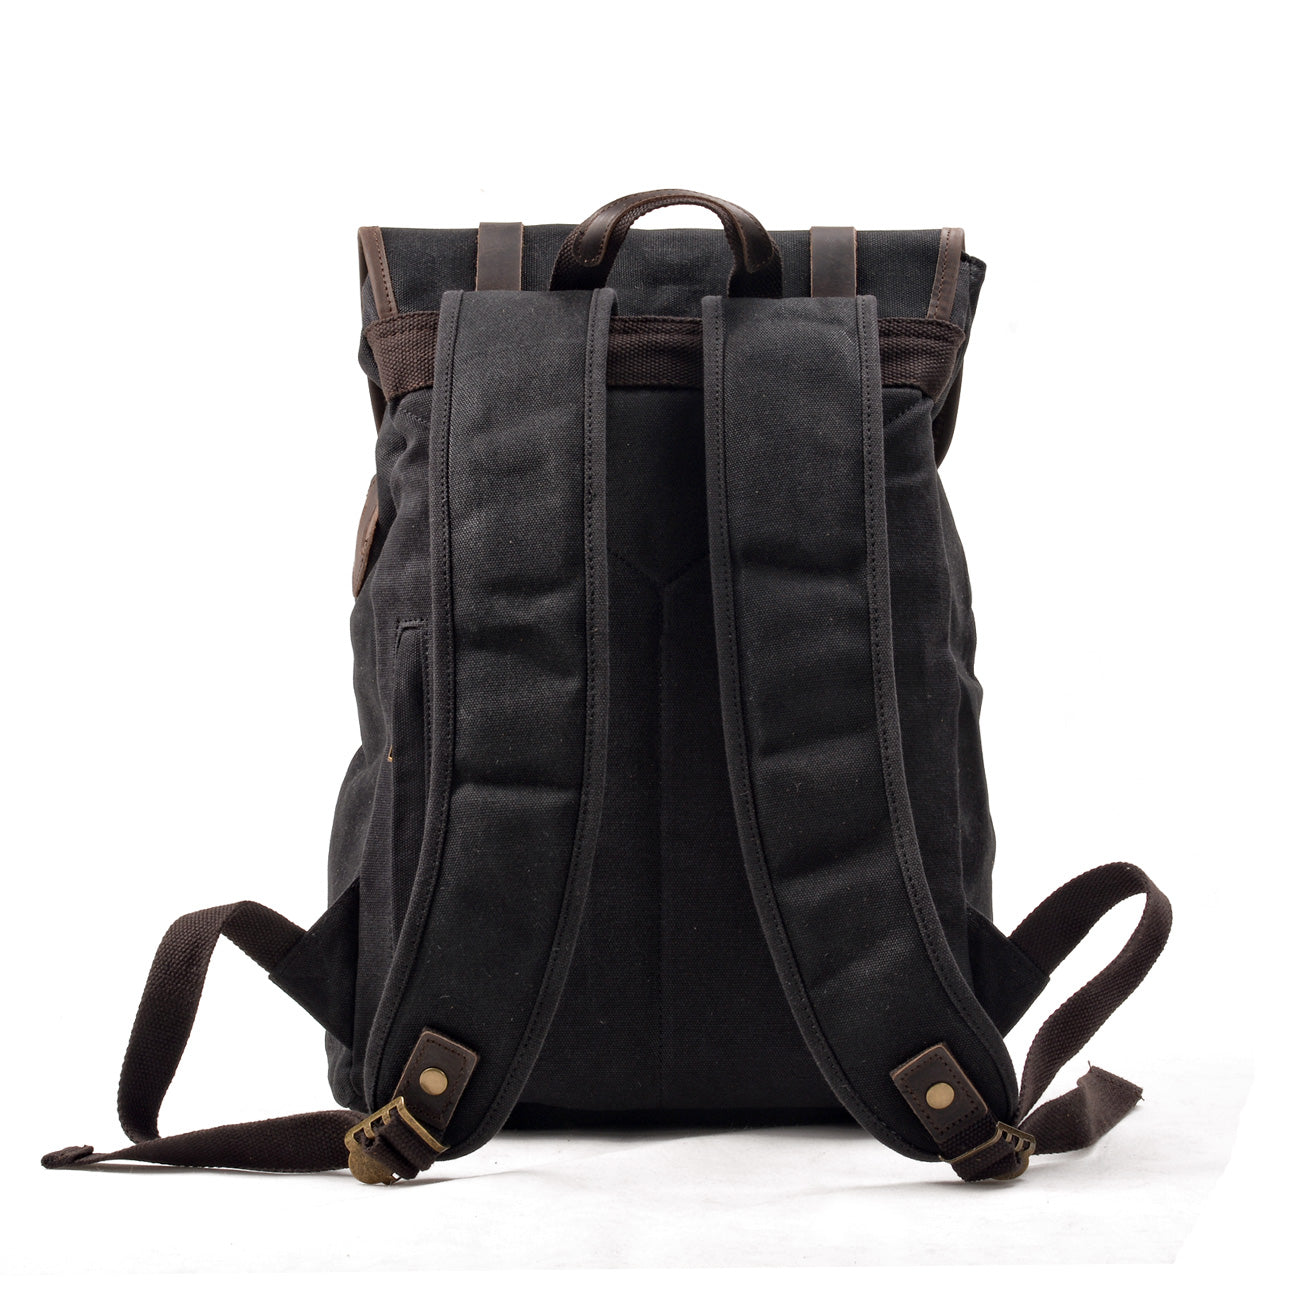 Waxed Canvas Vintage Laptop Backpack 20L